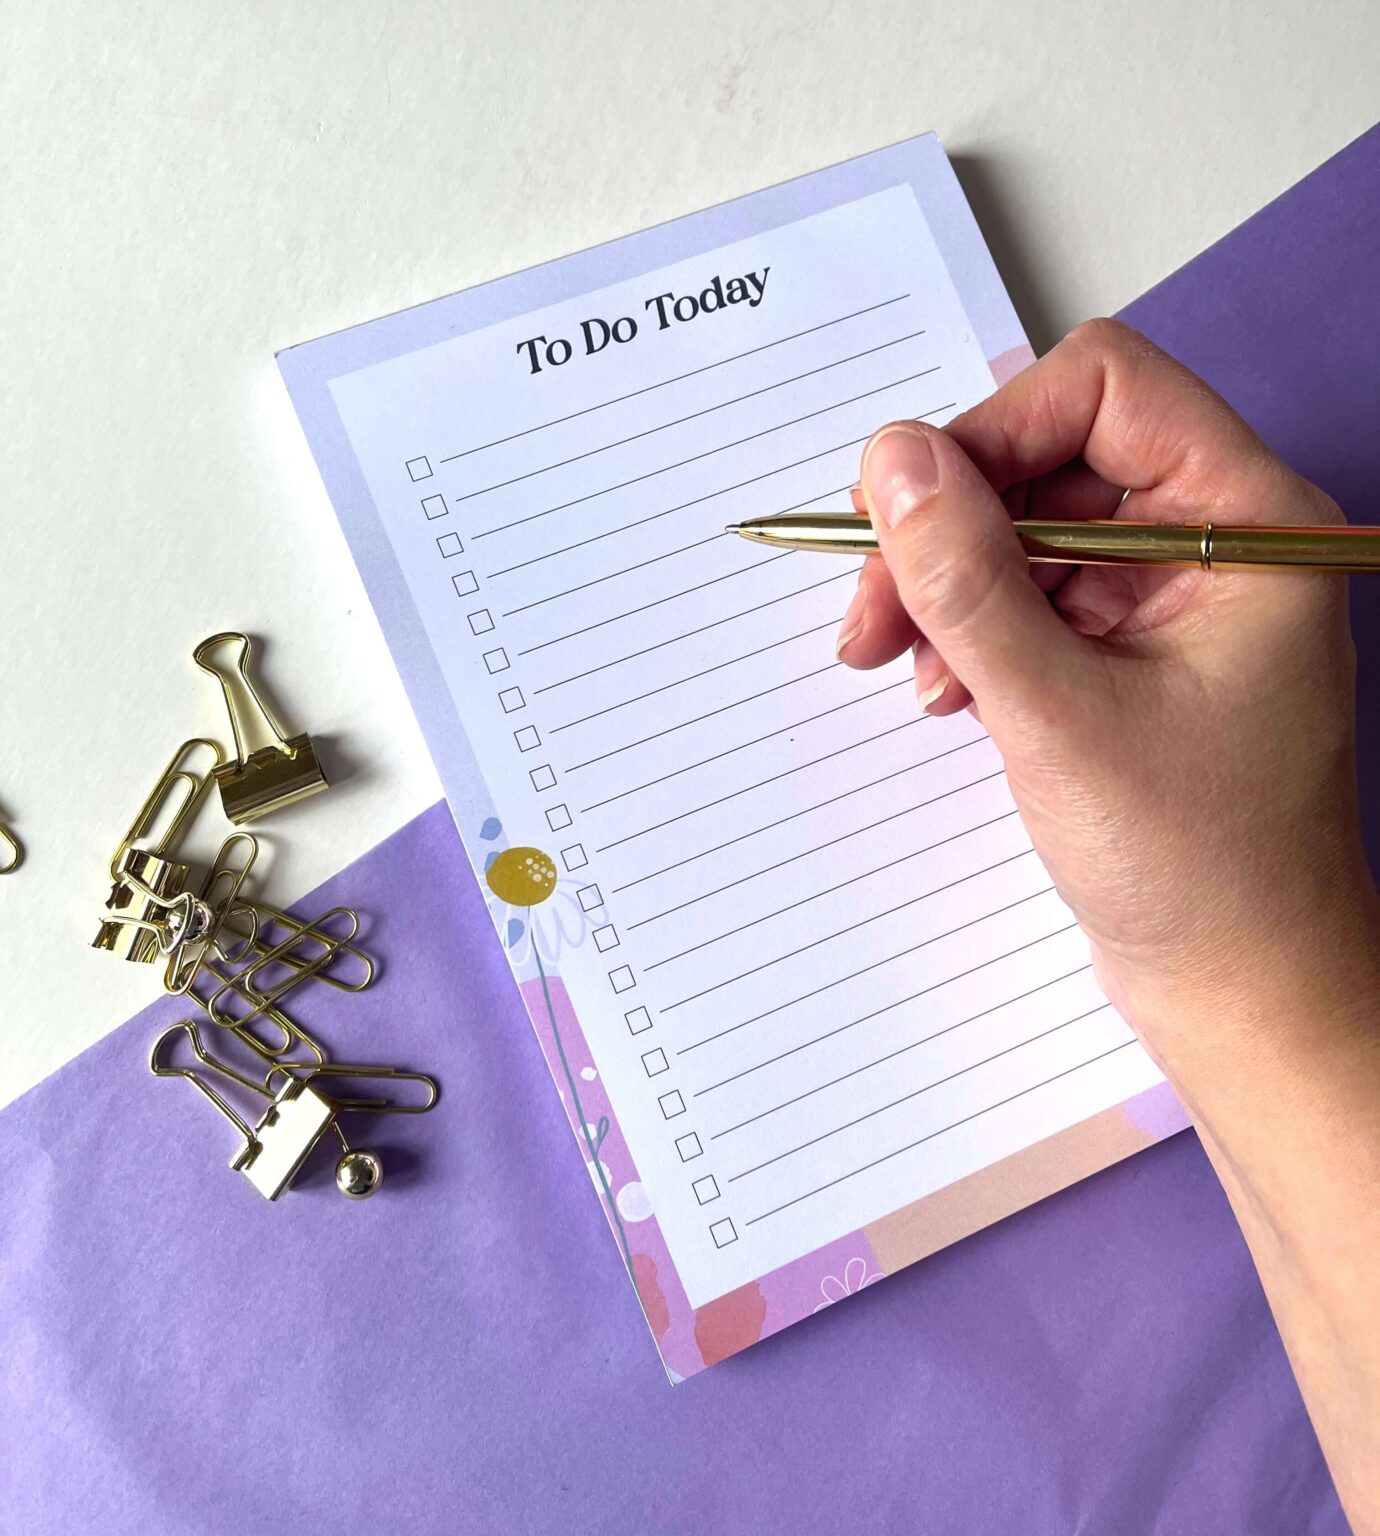 Daisy note pad with tear off sheets for daily lists